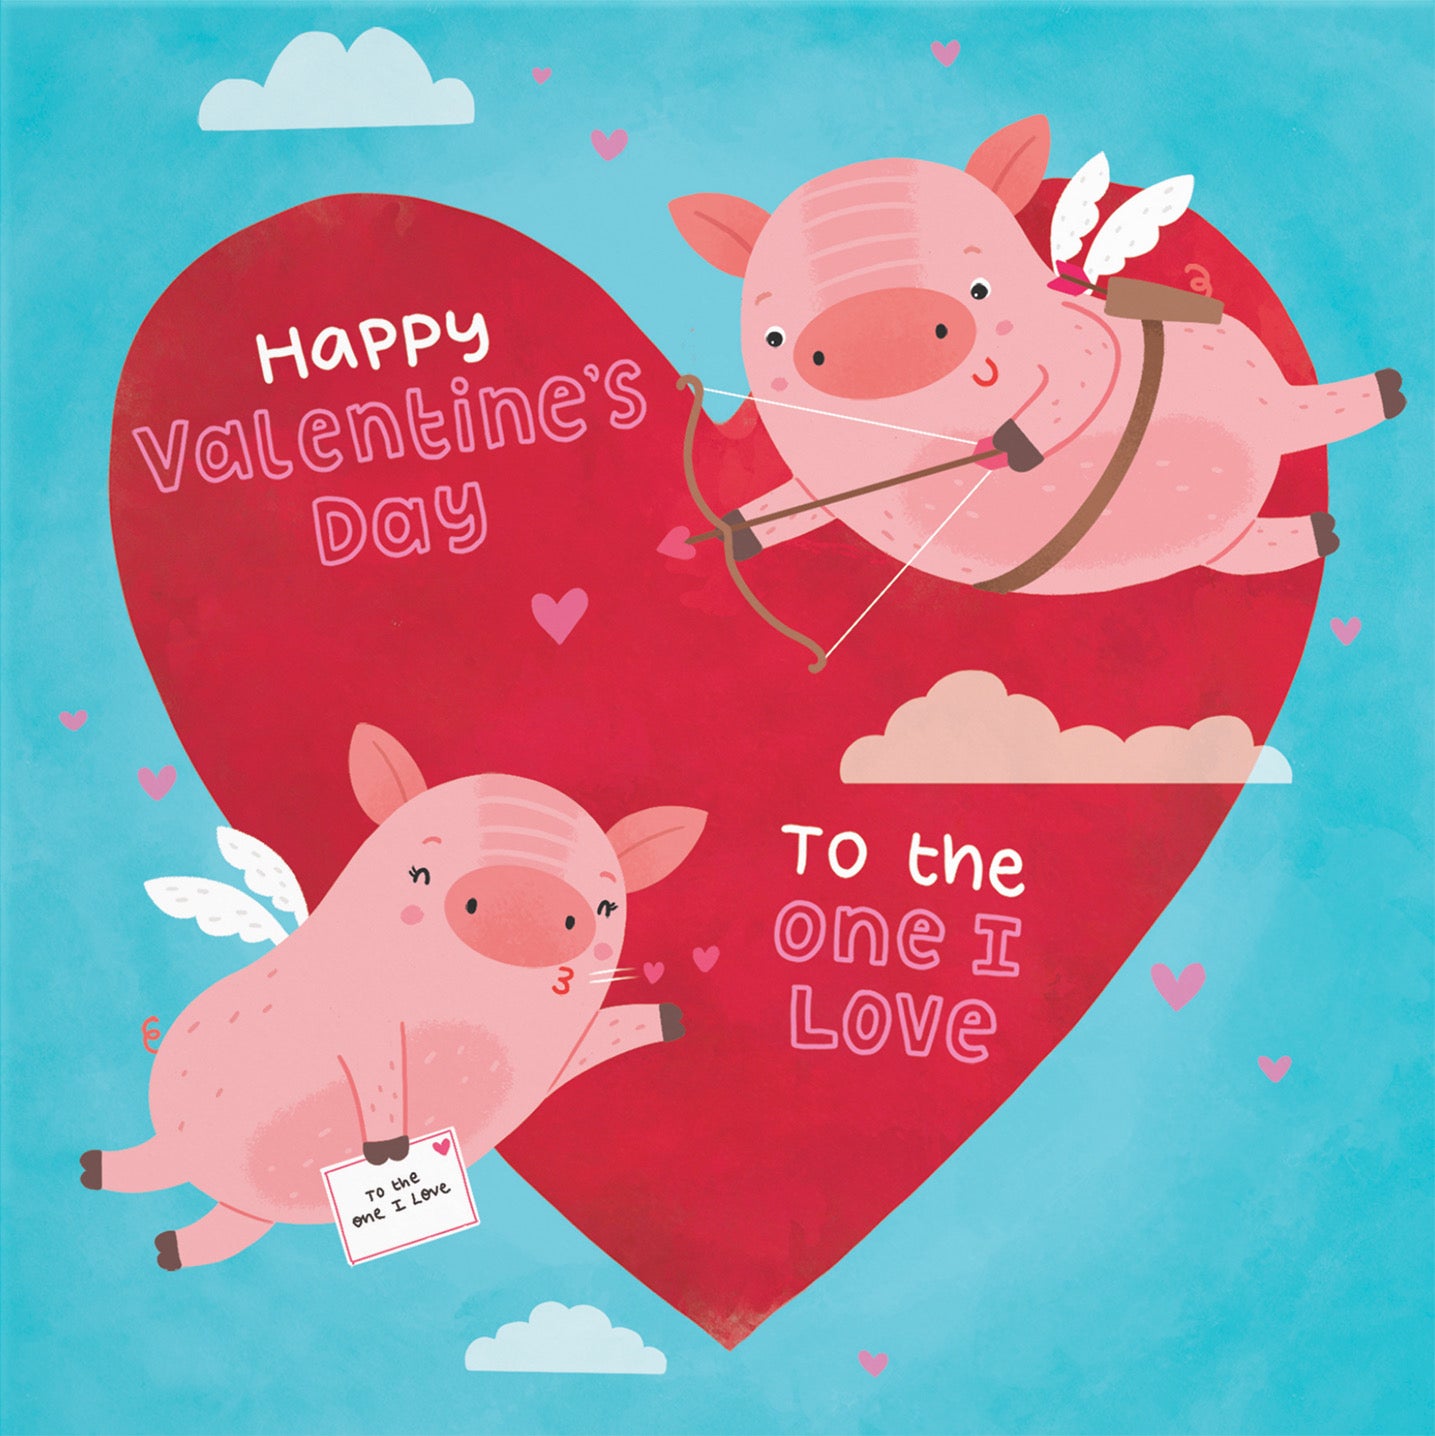 Cute Flying Pigs Valentine's Day Card Iconic - Default Title (B09R6N78FW)